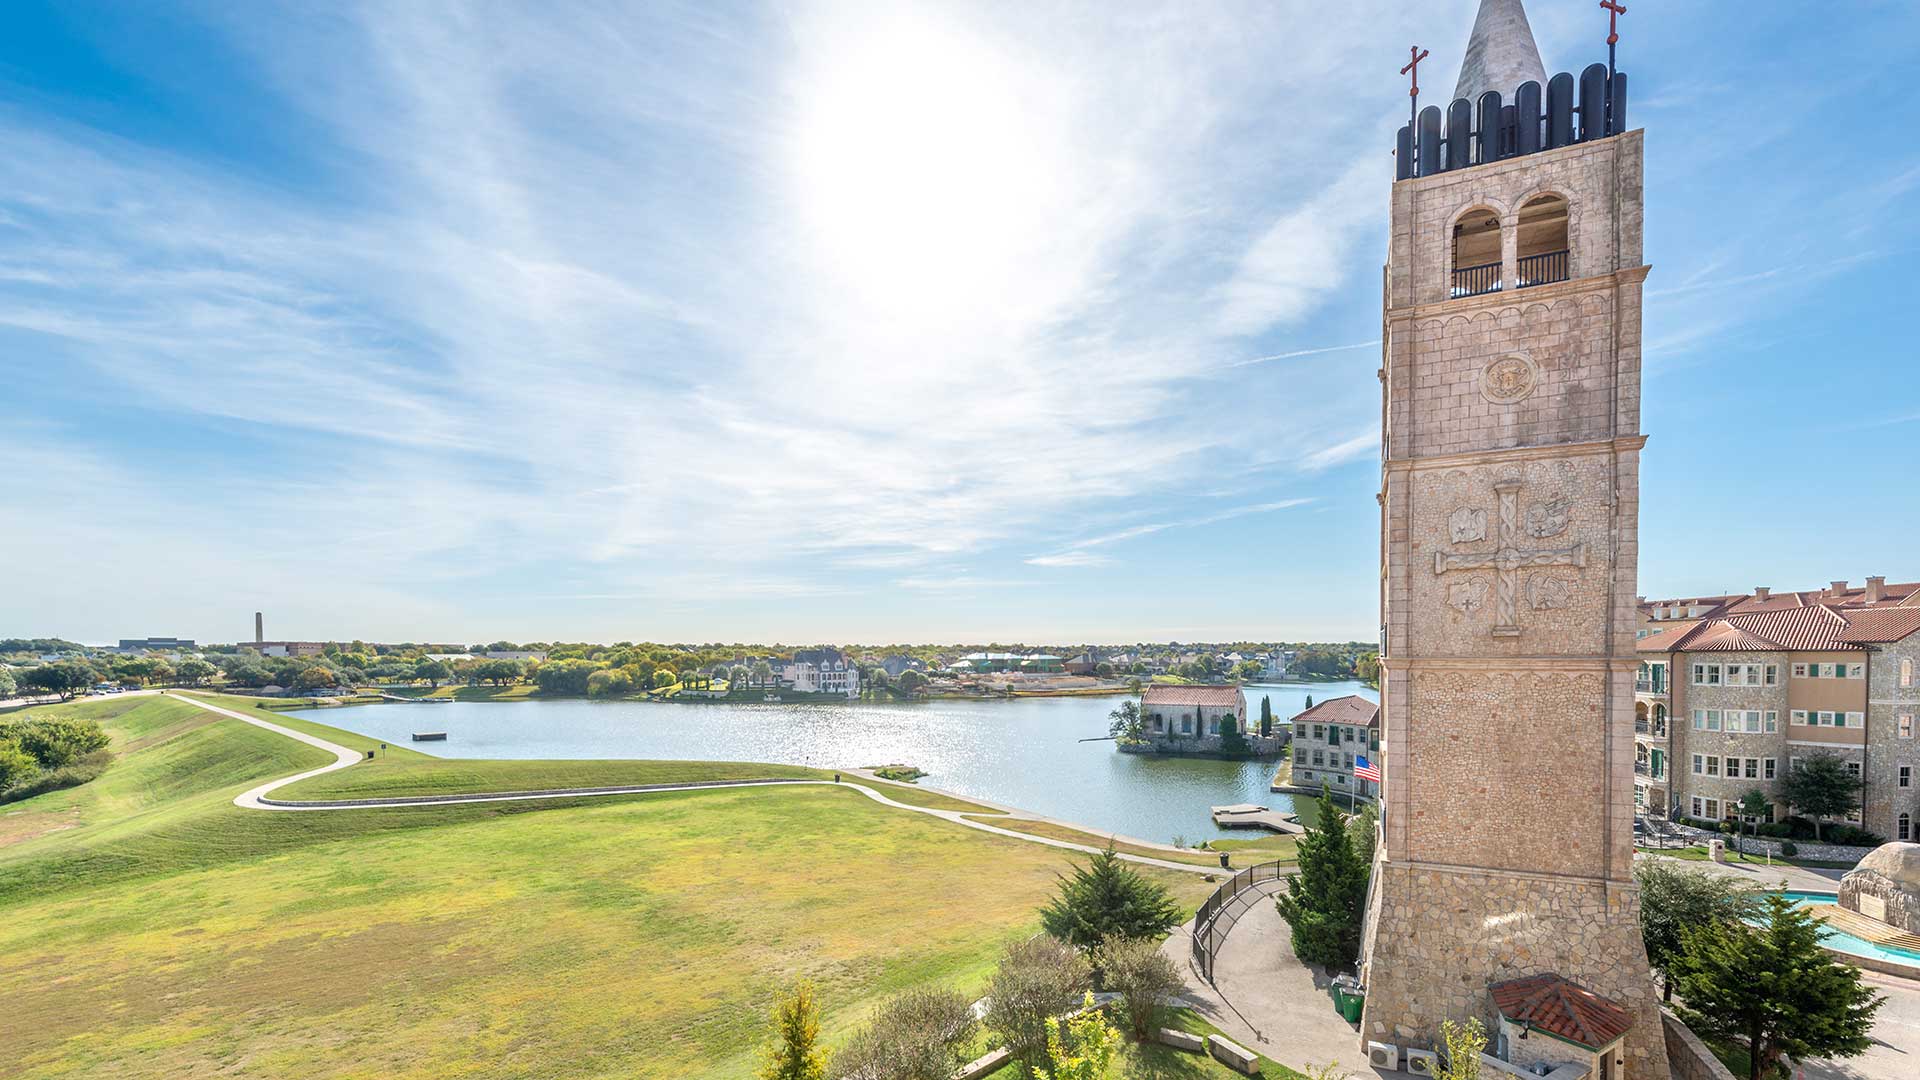 The Bell Tower stands tall on the right with an open field and the lake further beyond on the left.